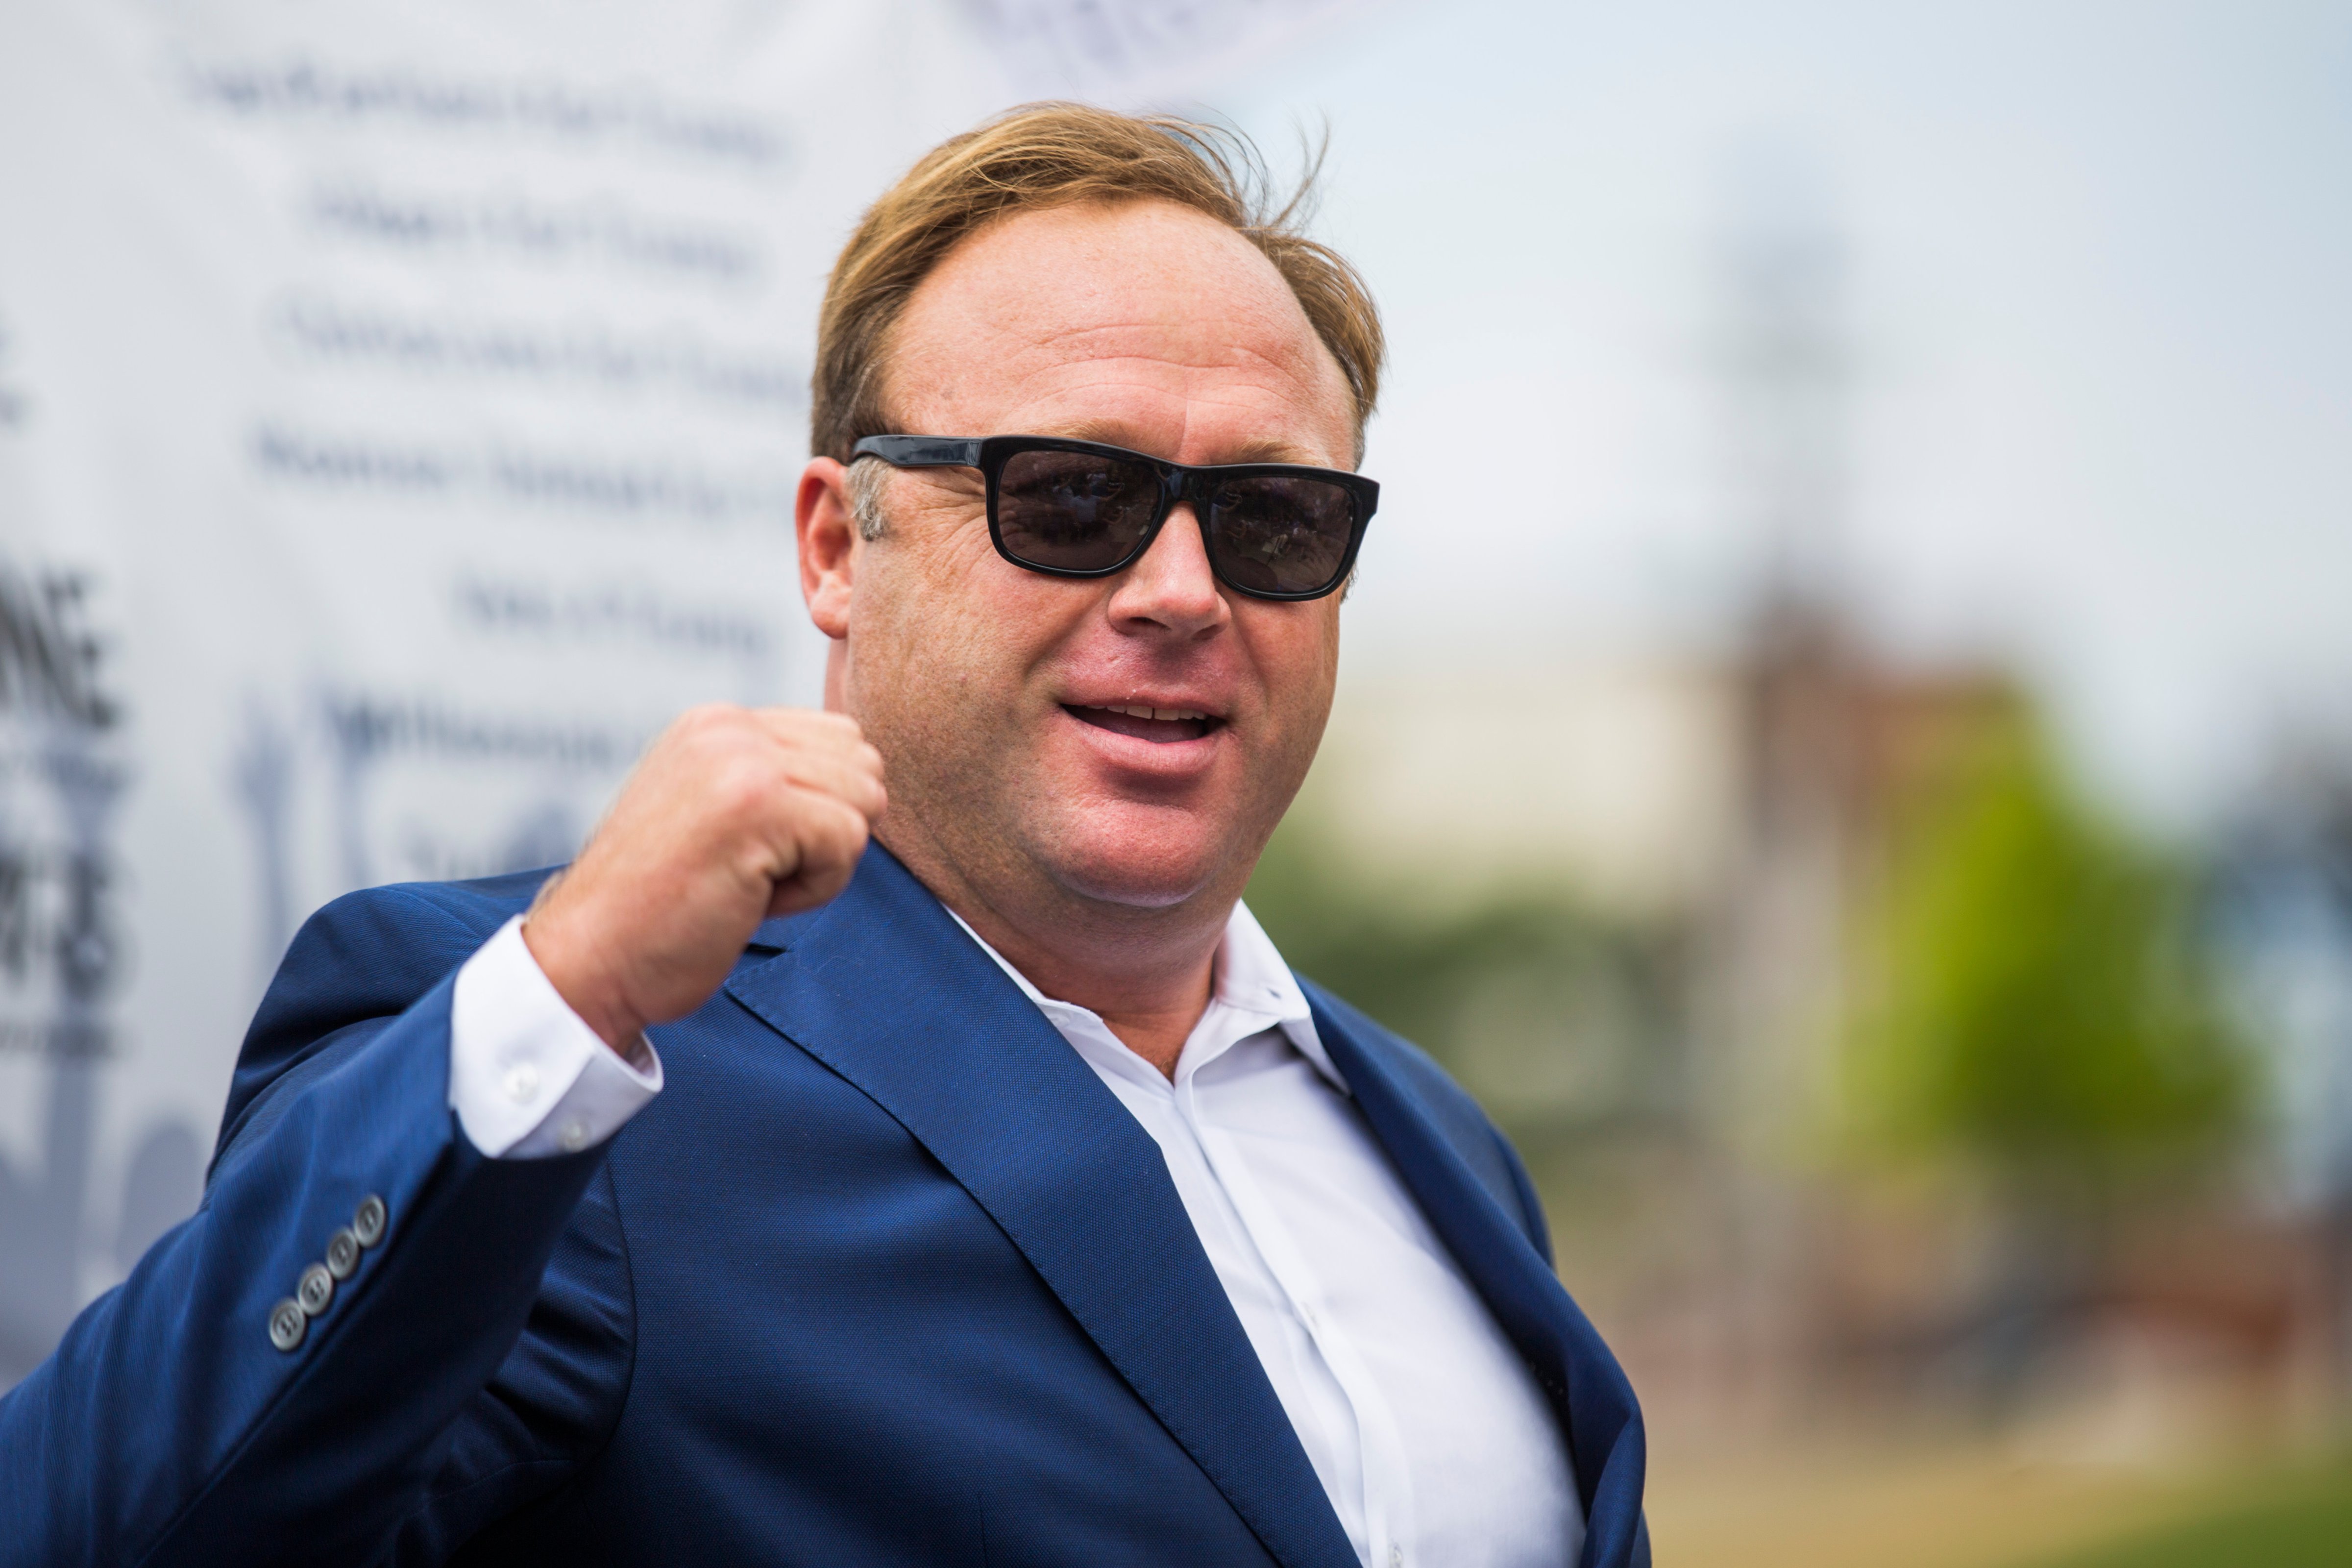 Alex Jones speaks during a rally in support of Donald Trump near the Republican National Convention on July 18, 2016 in Cleveland (Brooks Kraft&mdash;Getty Images)